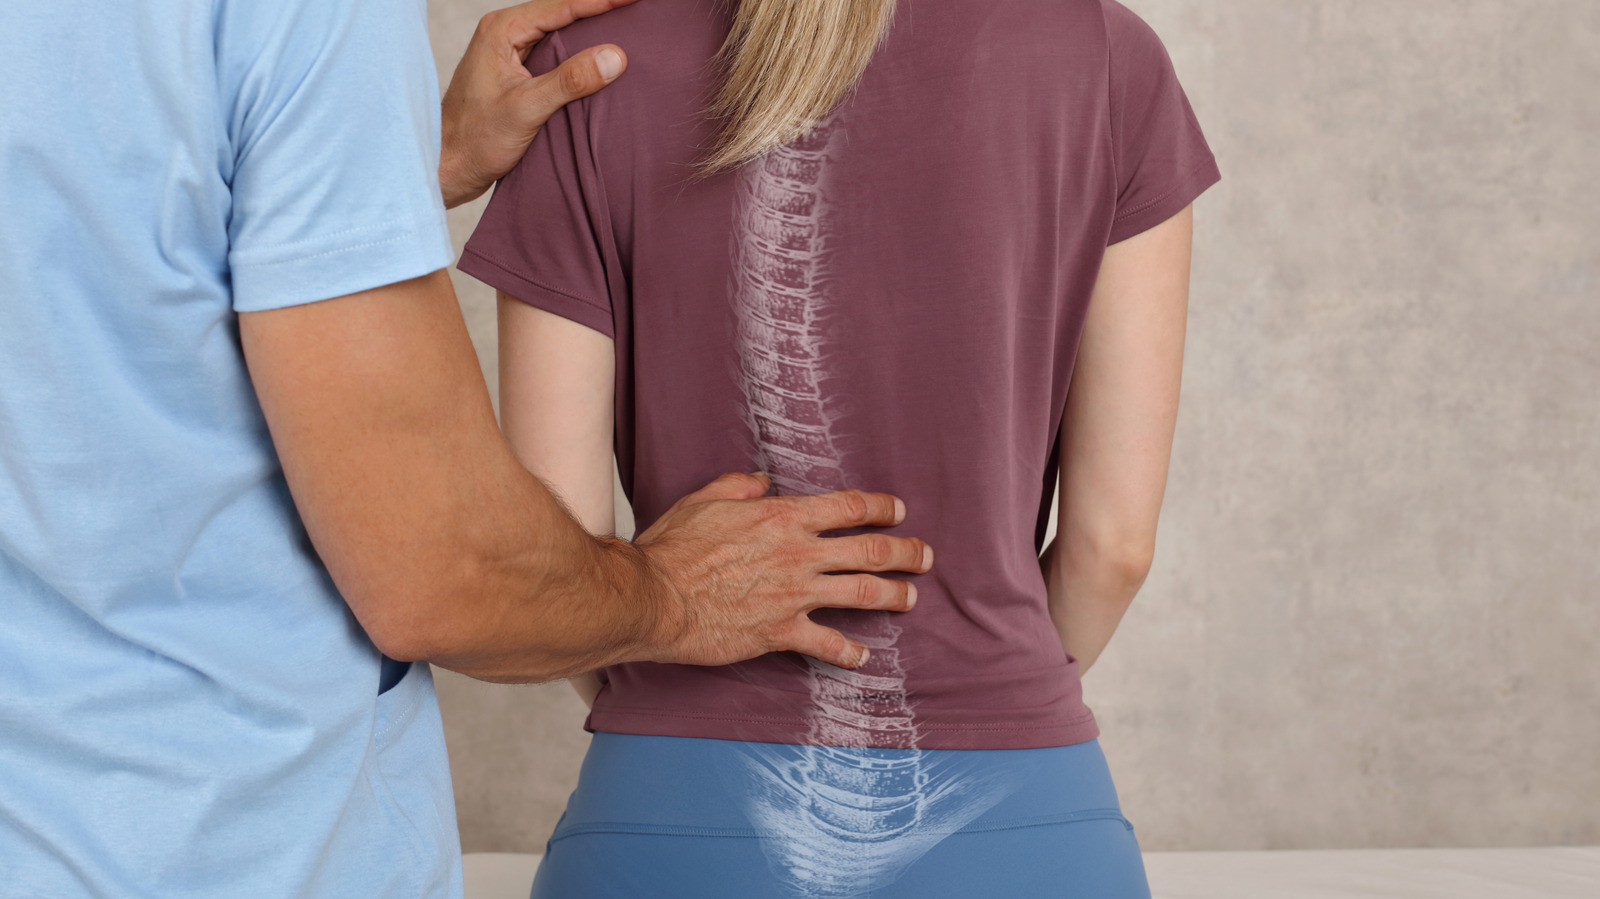 Nonsurgical Treatment Options for Scoliosis - OrthoInfo - AAOS